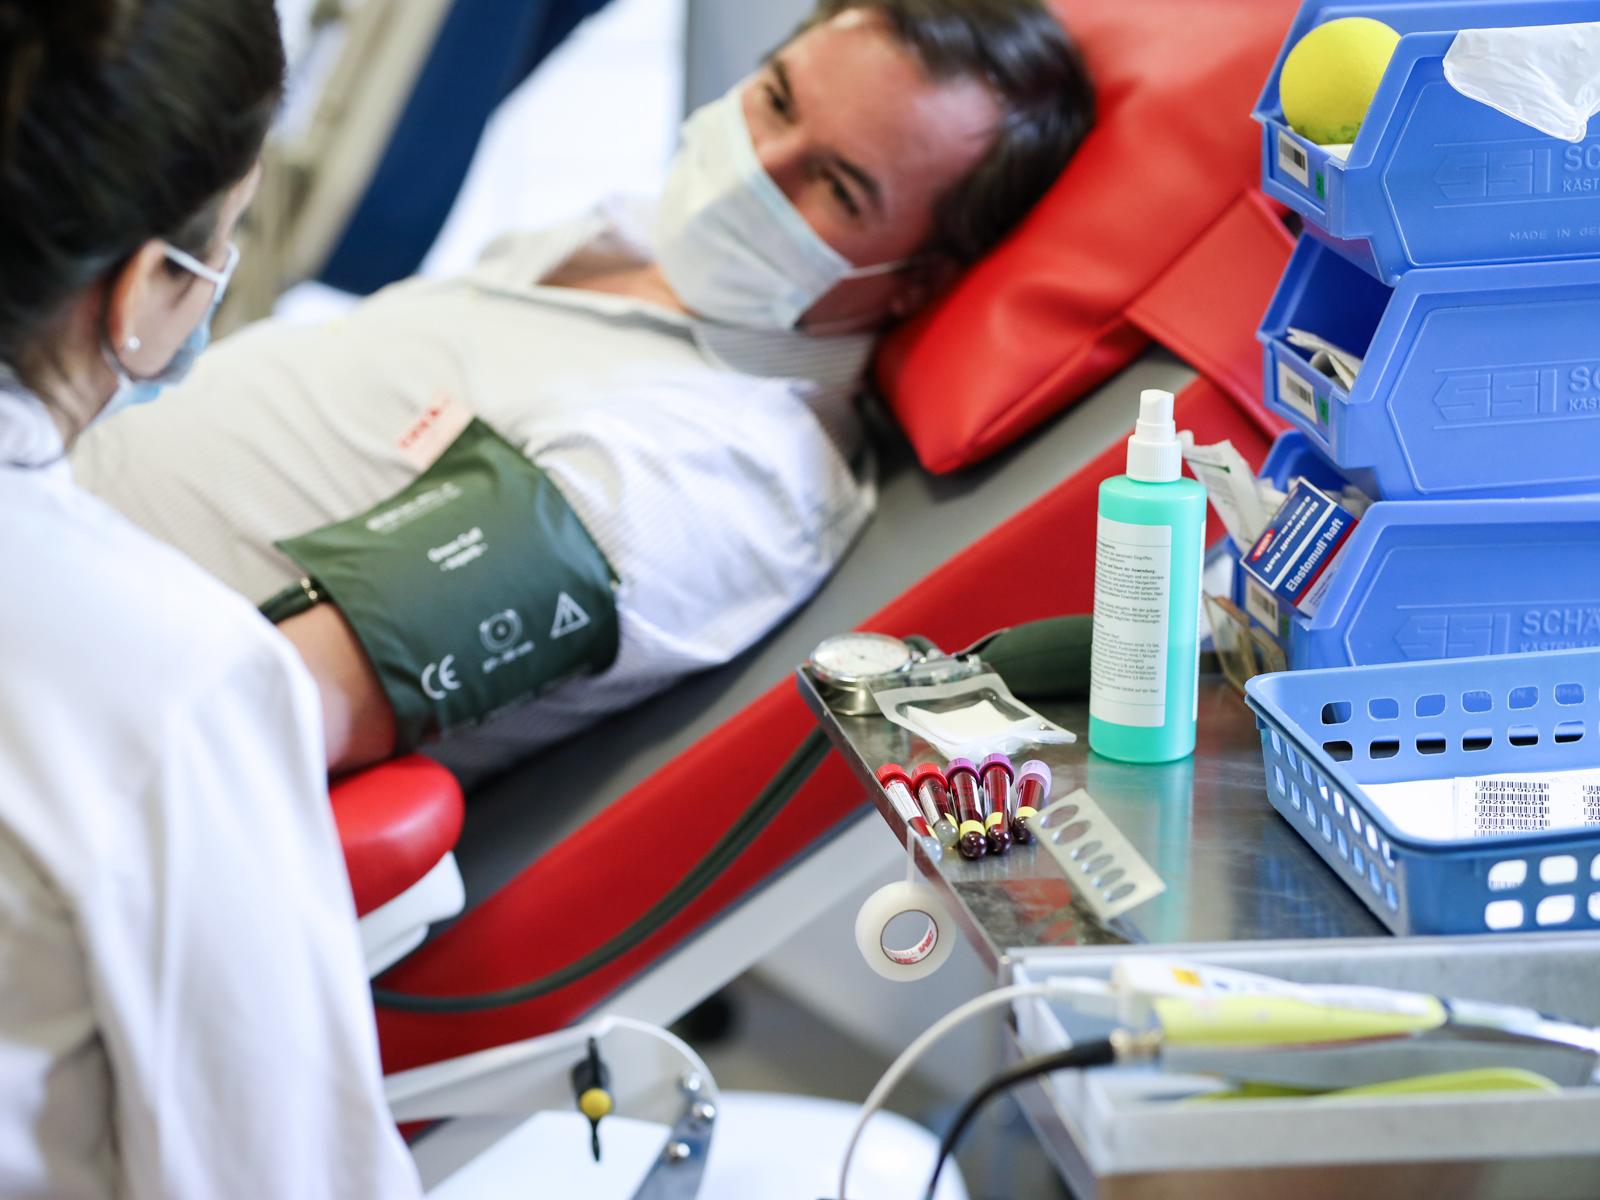 Prince Guillaume - Blood donation